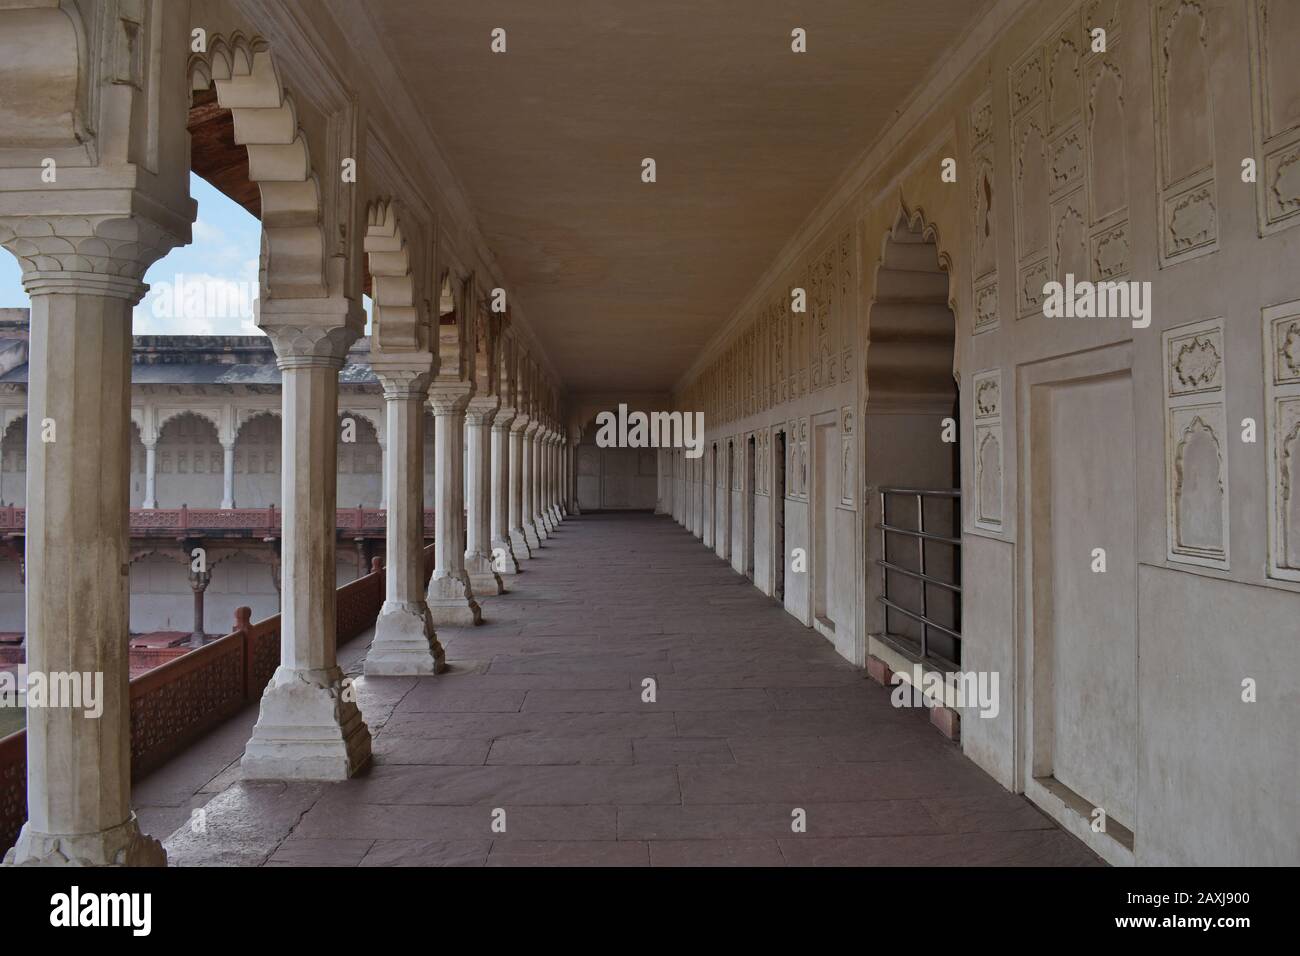 Architecture of courtyards and gardens inside the complex of Agra Fort, Agra, Uttar Pradesh, India Stock Photo